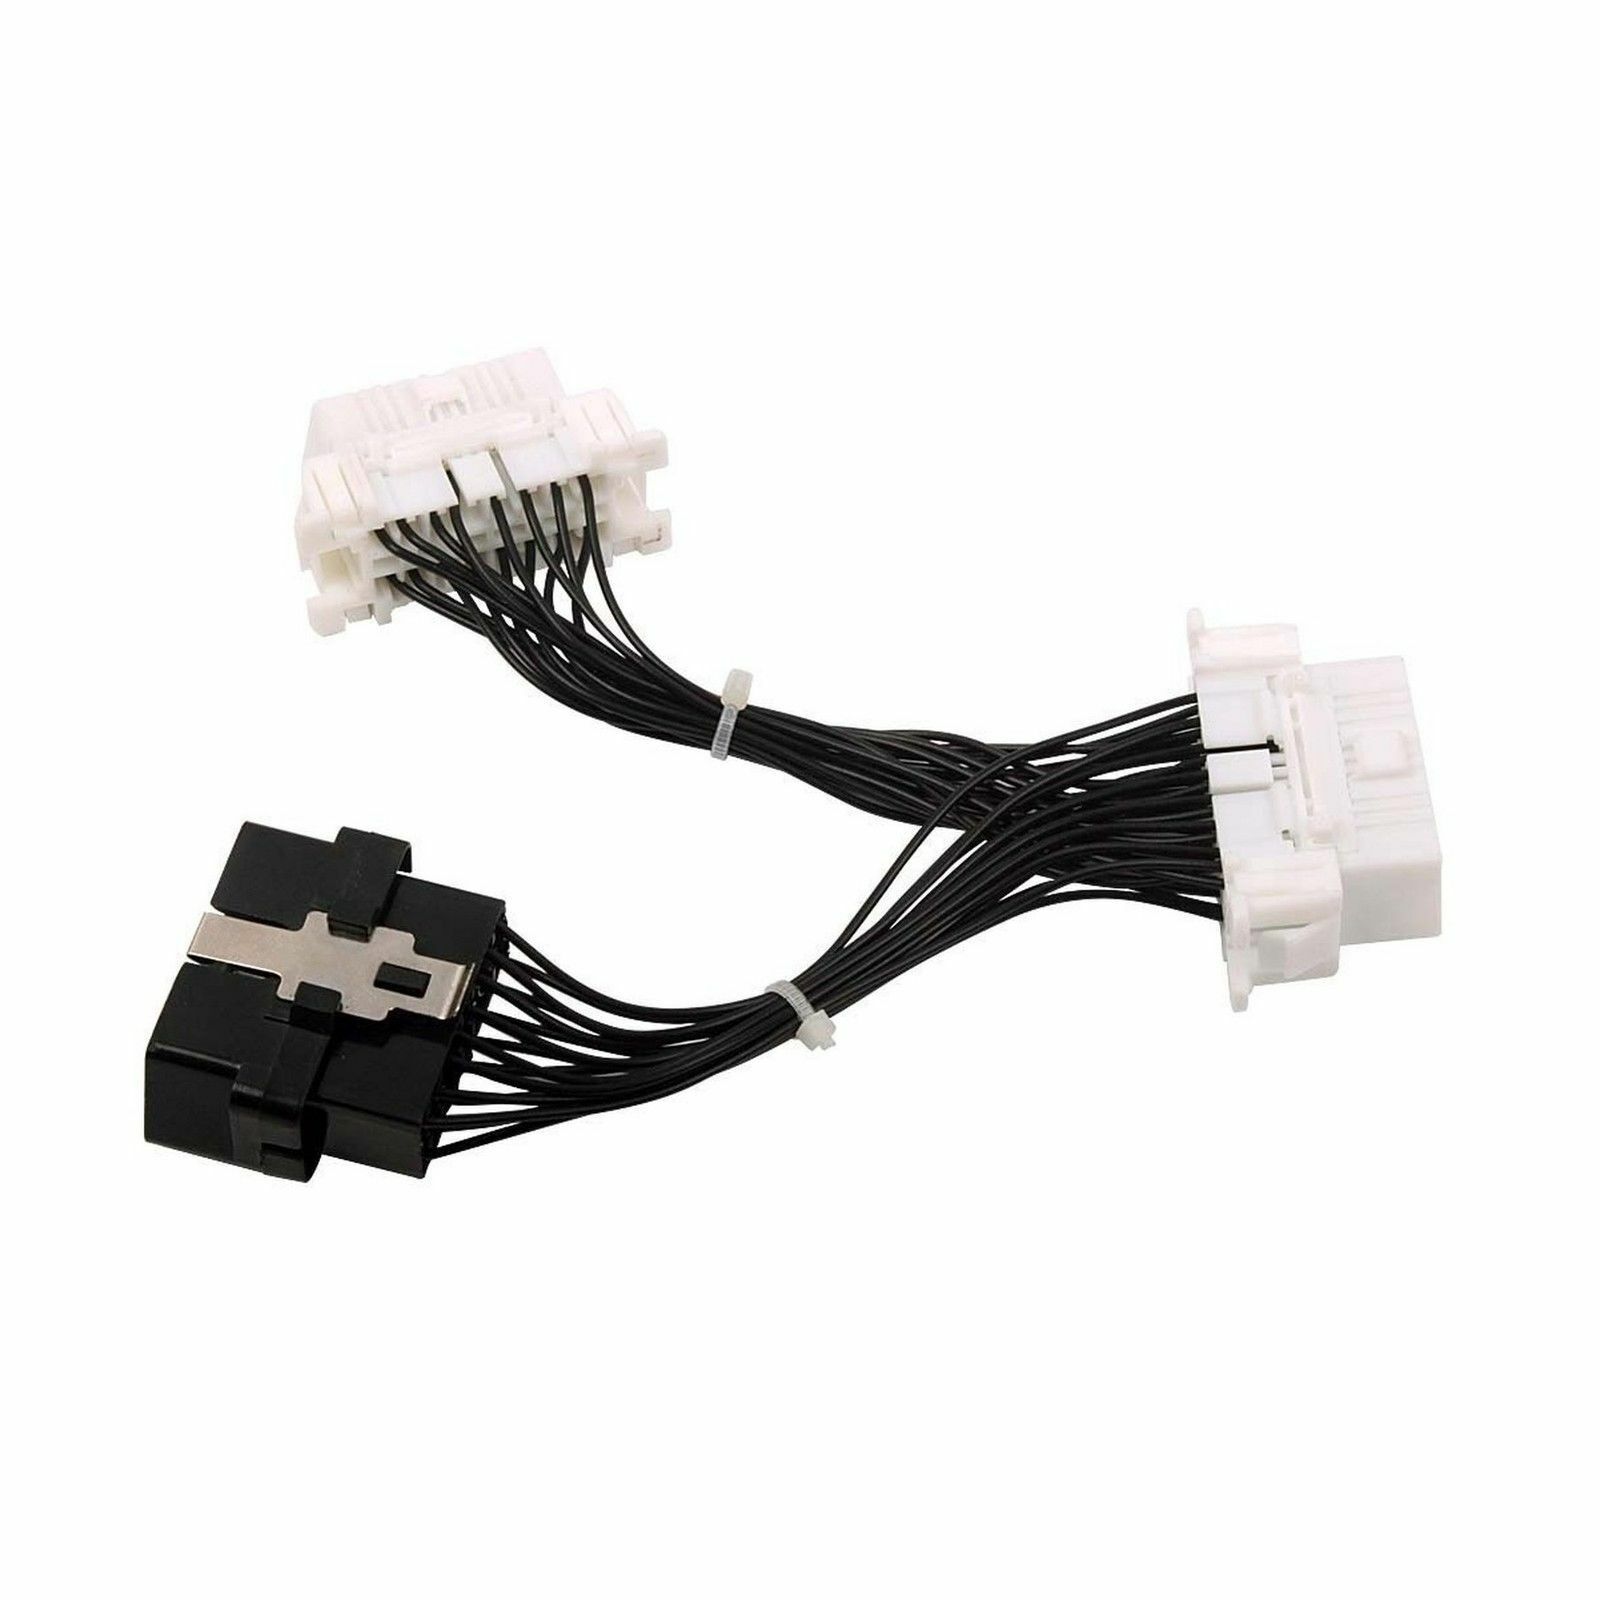 OBD2 II Y SPLITTER CABLE HARNESS 16 PIN MALE TO DUAL 2 FEMALES ADAPTER EXTENSION